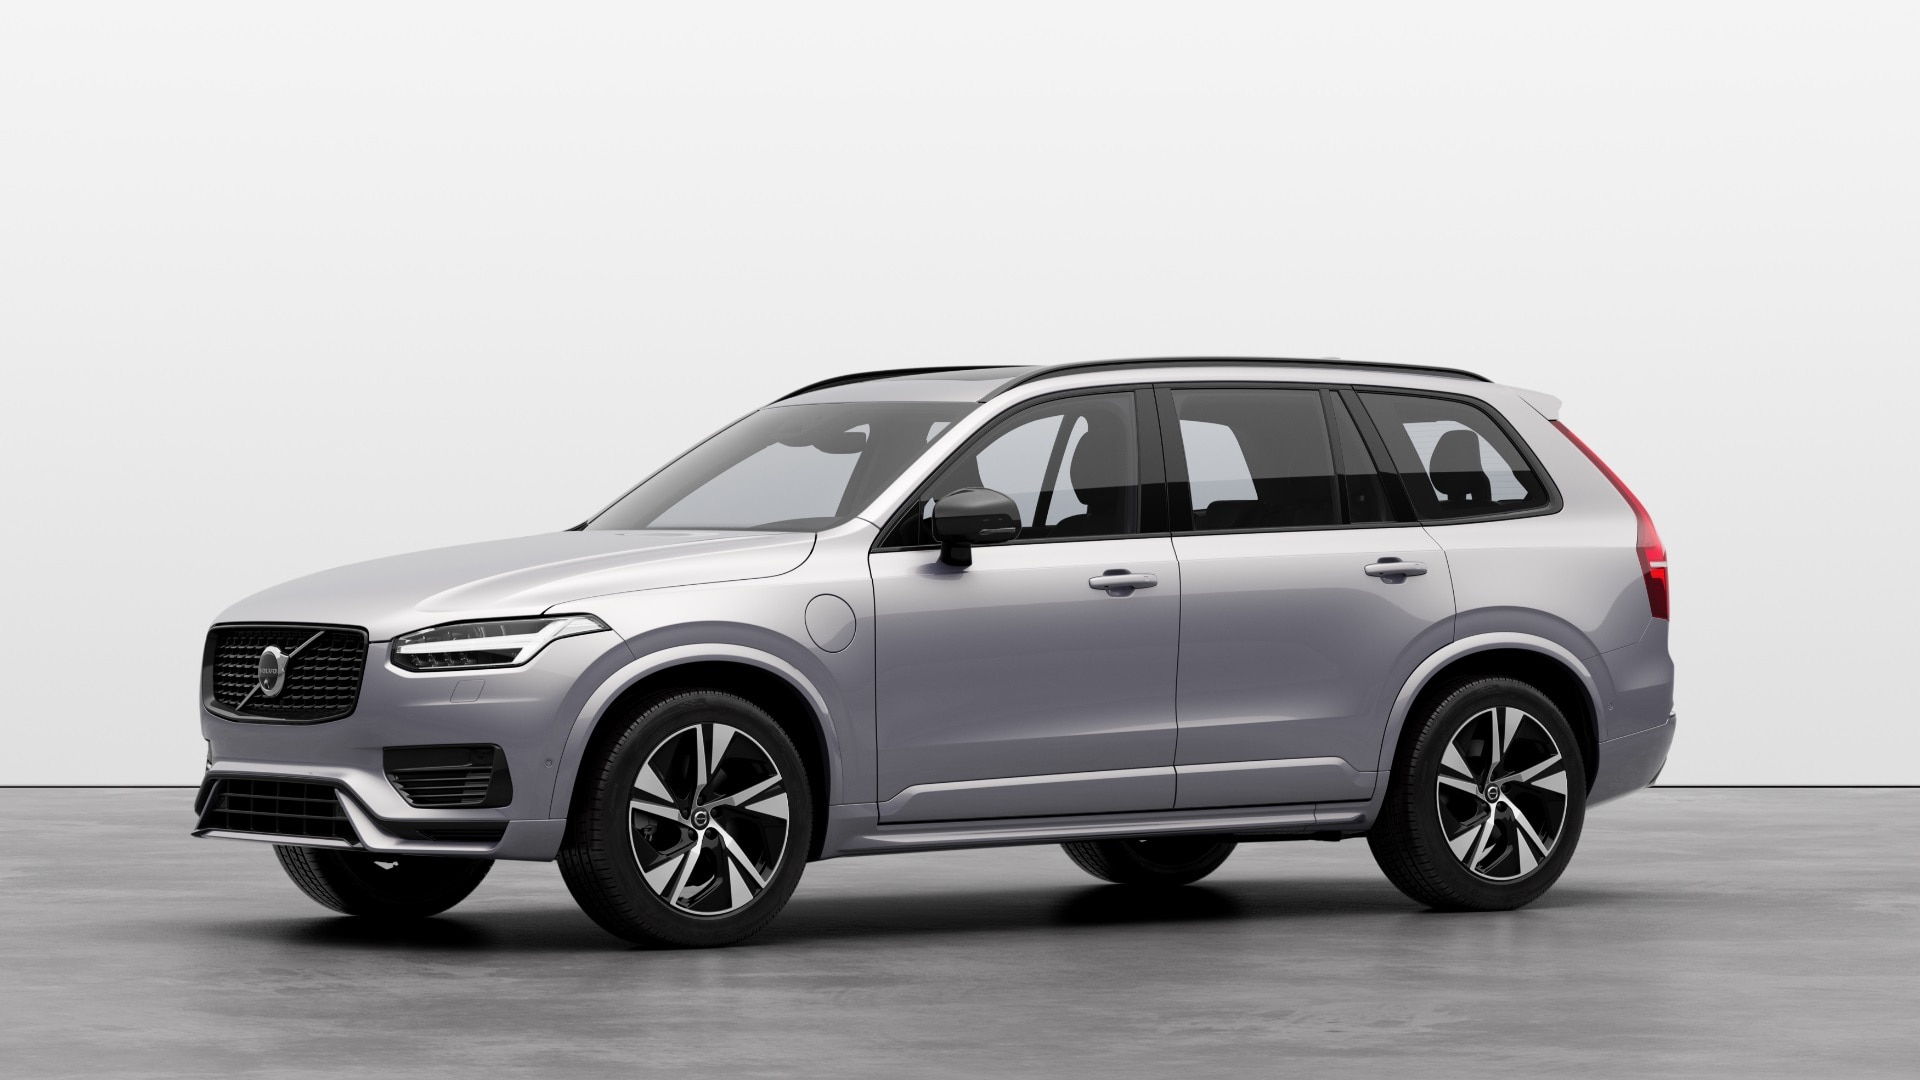 Volvo XC90 Recharge 2.0 T8 [455] RC PHEV Plus Dark 5dr AWD Geartronic Image 1